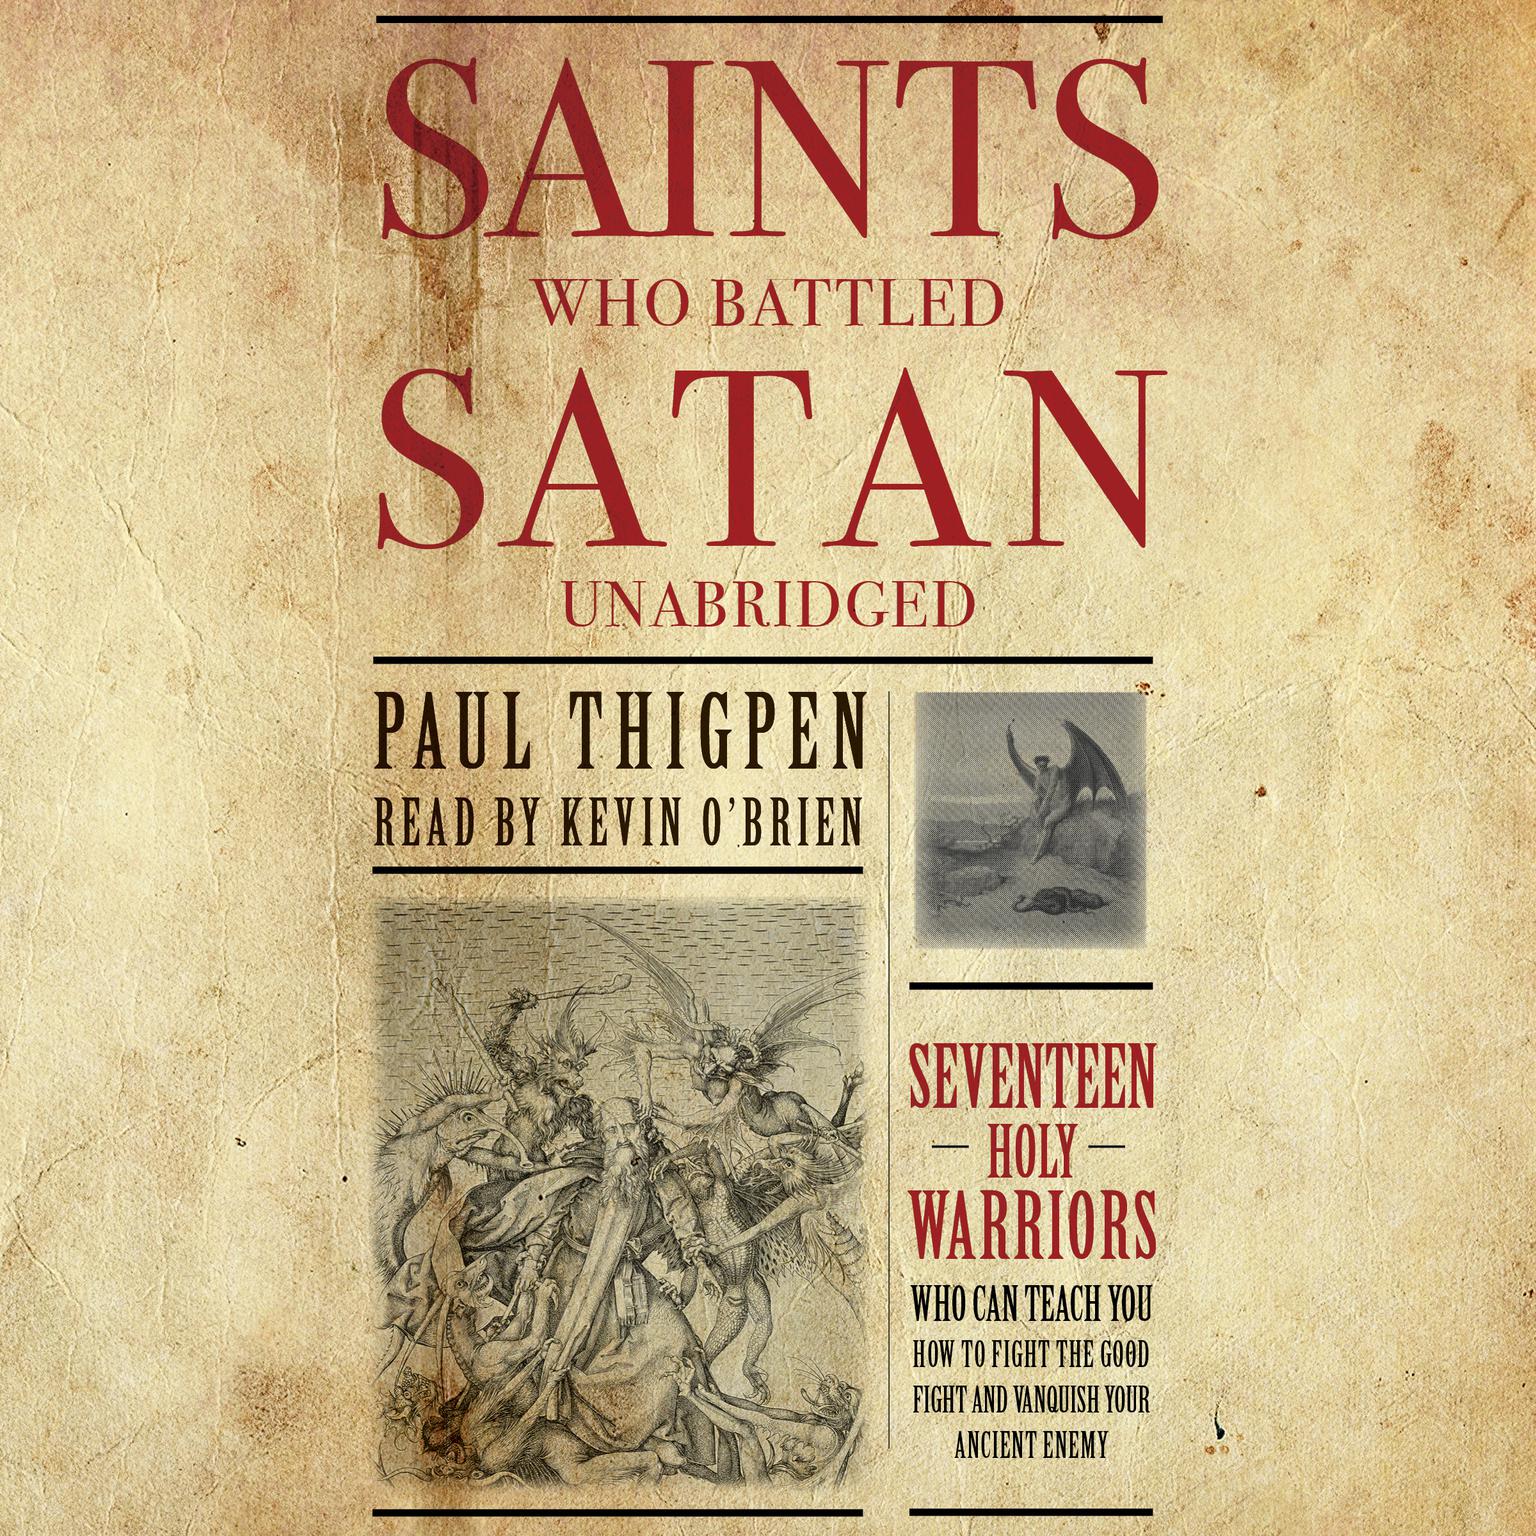 Saints Who Battled Satan: Seventeen Holy Warriors Who Can Teach You How to Fight the Good Fight and Vanquish Your Ancient Enemy Audiobook, by Paul Thigpen